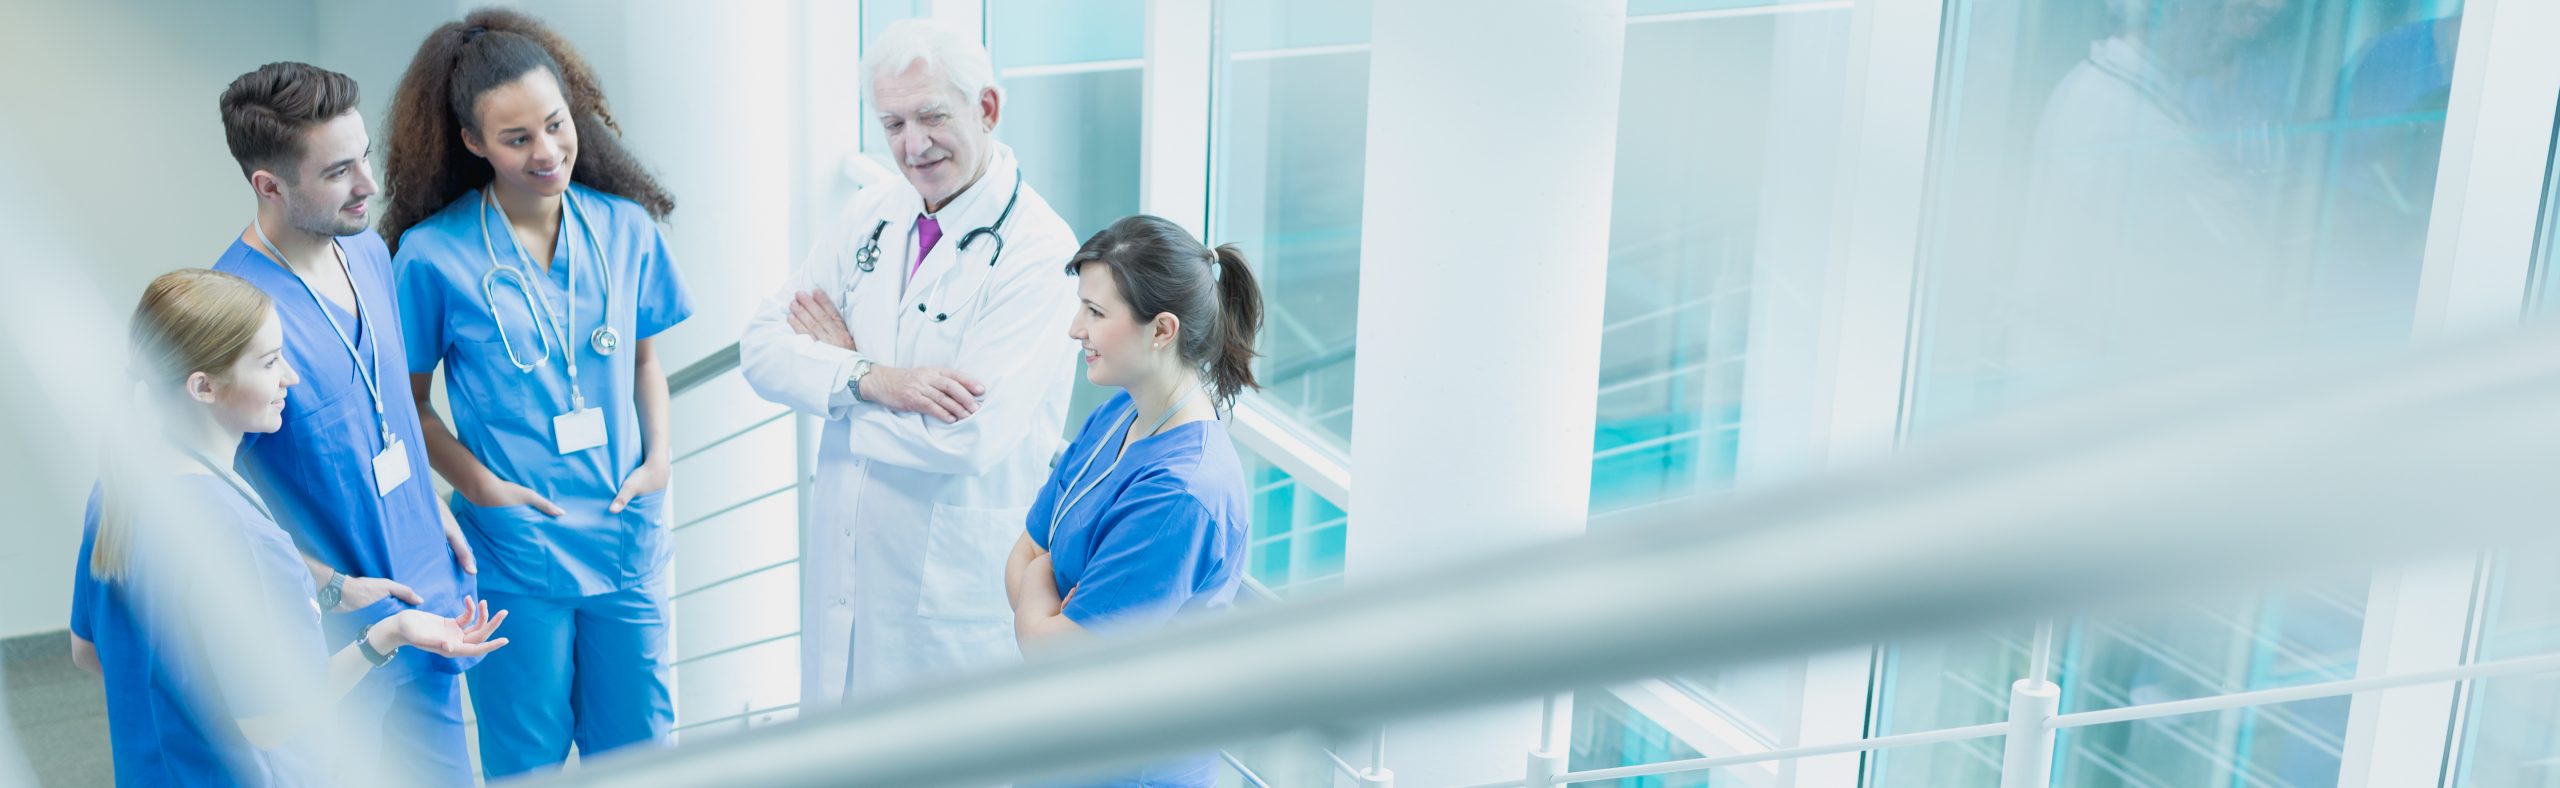 How U.S. Healthcare Organizations can Secure Their Operations to Better Support Patient Care